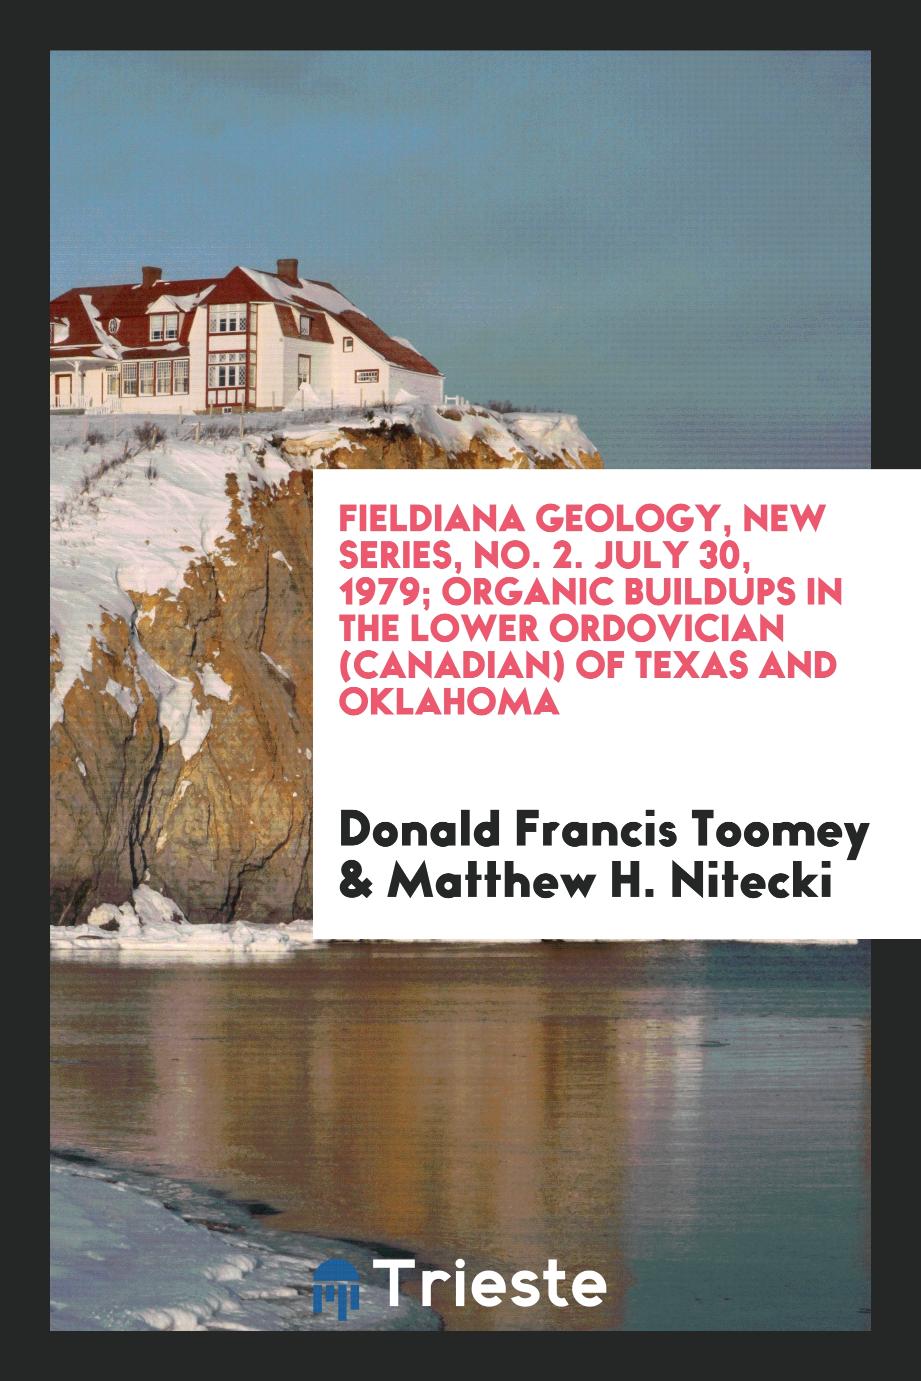 Fieldiana geology, New series, No. 2. July 30, 1979; Organic buildups in the Lower Ordovician (Canadian) of Texas and Oklahoma